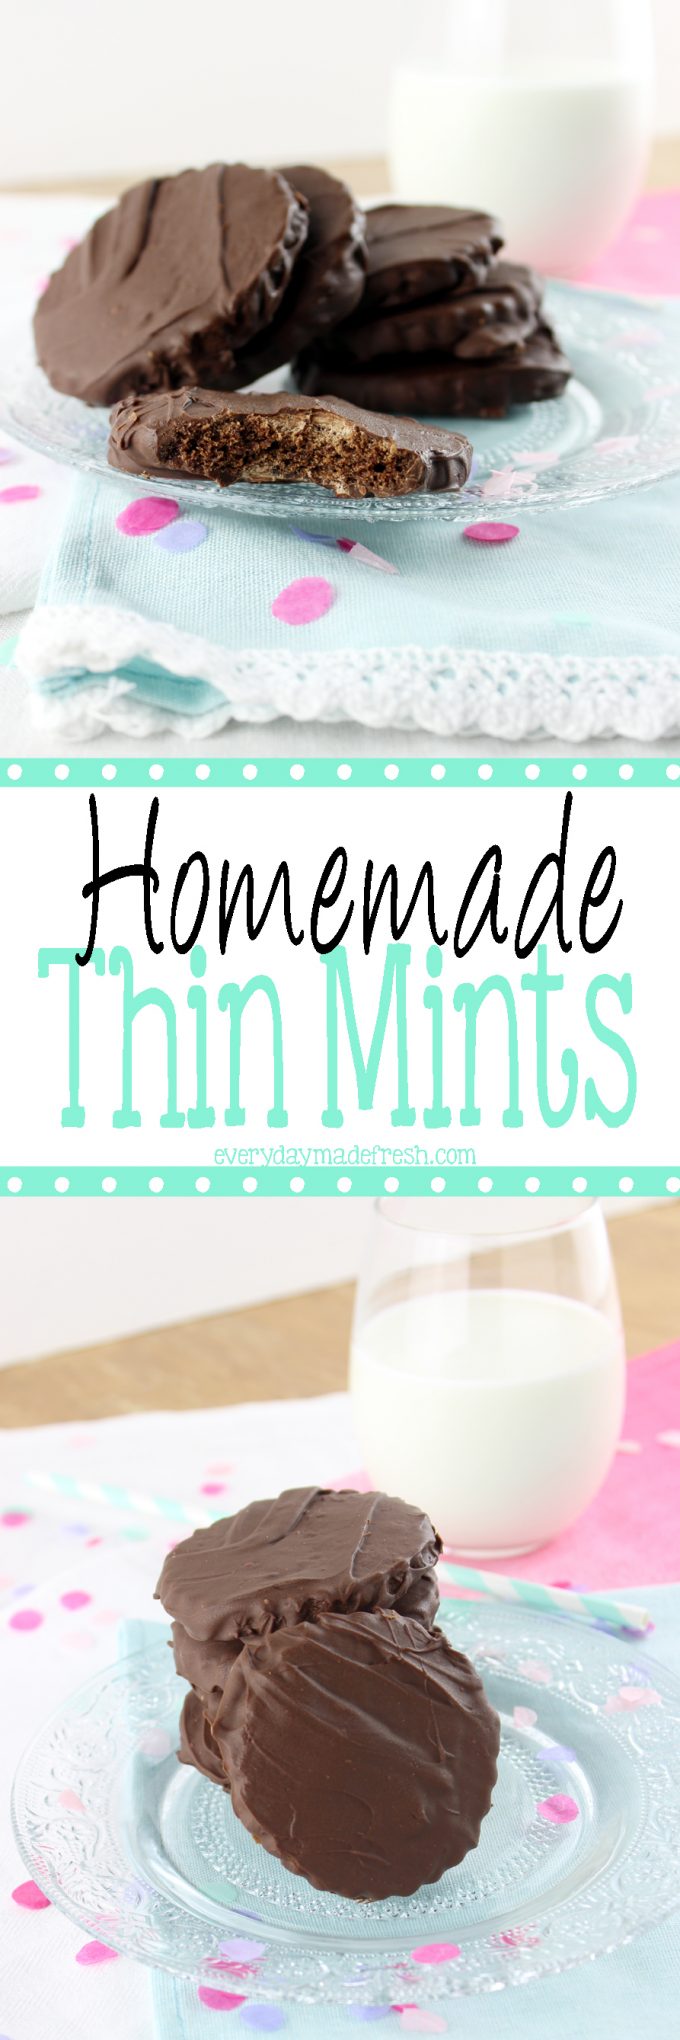 Girl Scout cookie season is only once a year, but you can enjoy one of my favorites with this easy Homemade Thin Mints recipe! | EverydayMadeFresh.com